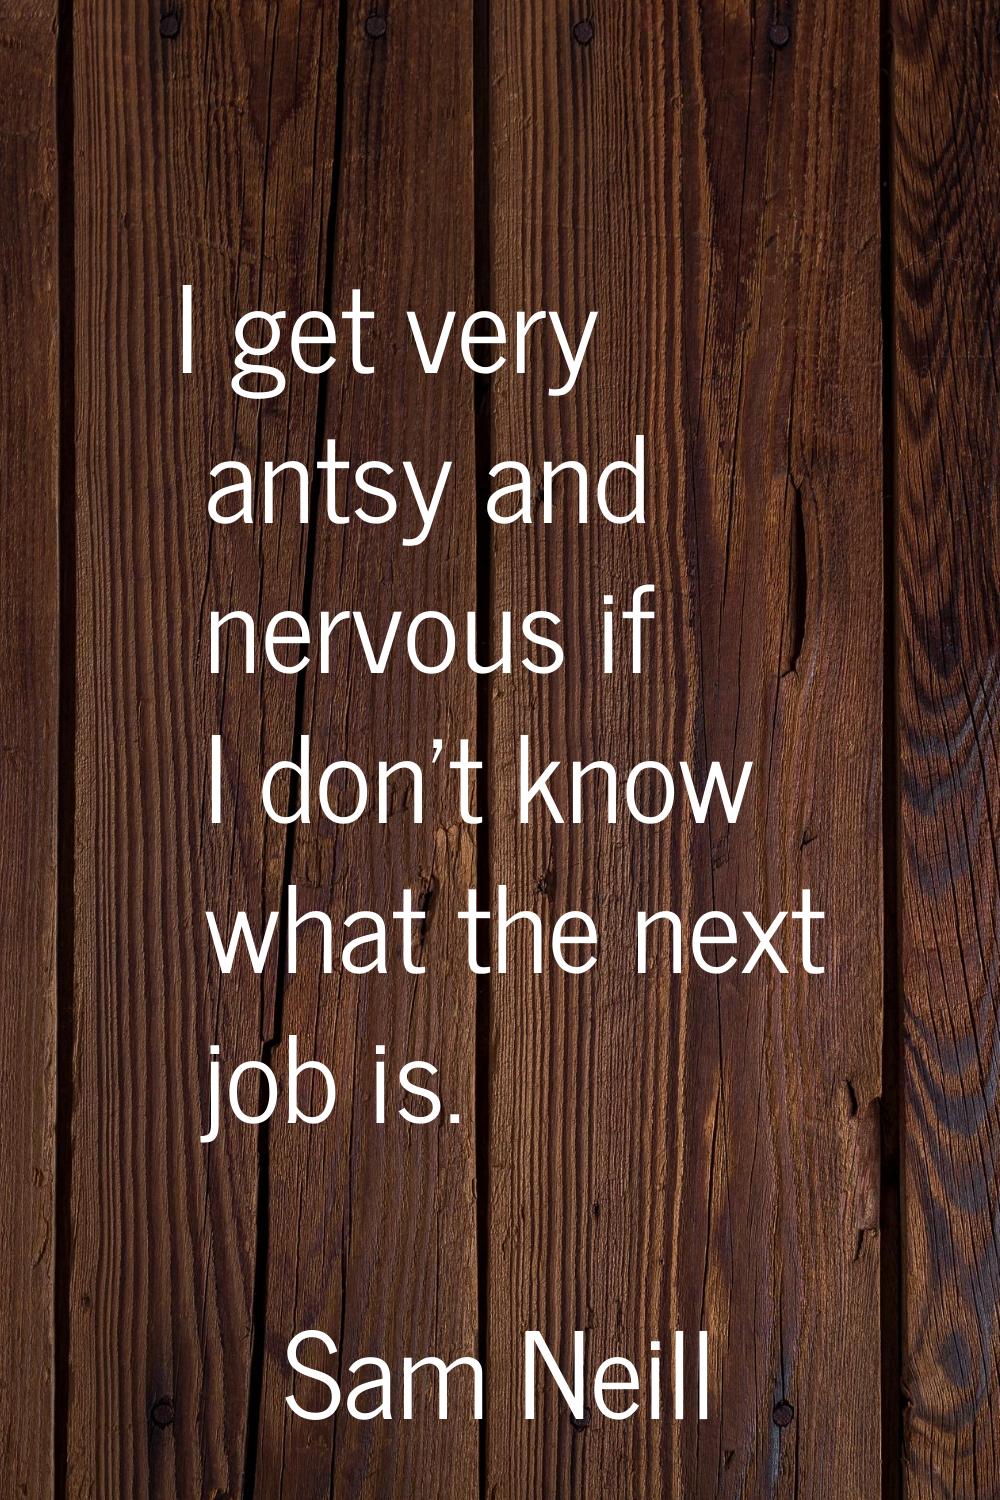 I get very antsy and nervous if I don't know what the next job is.